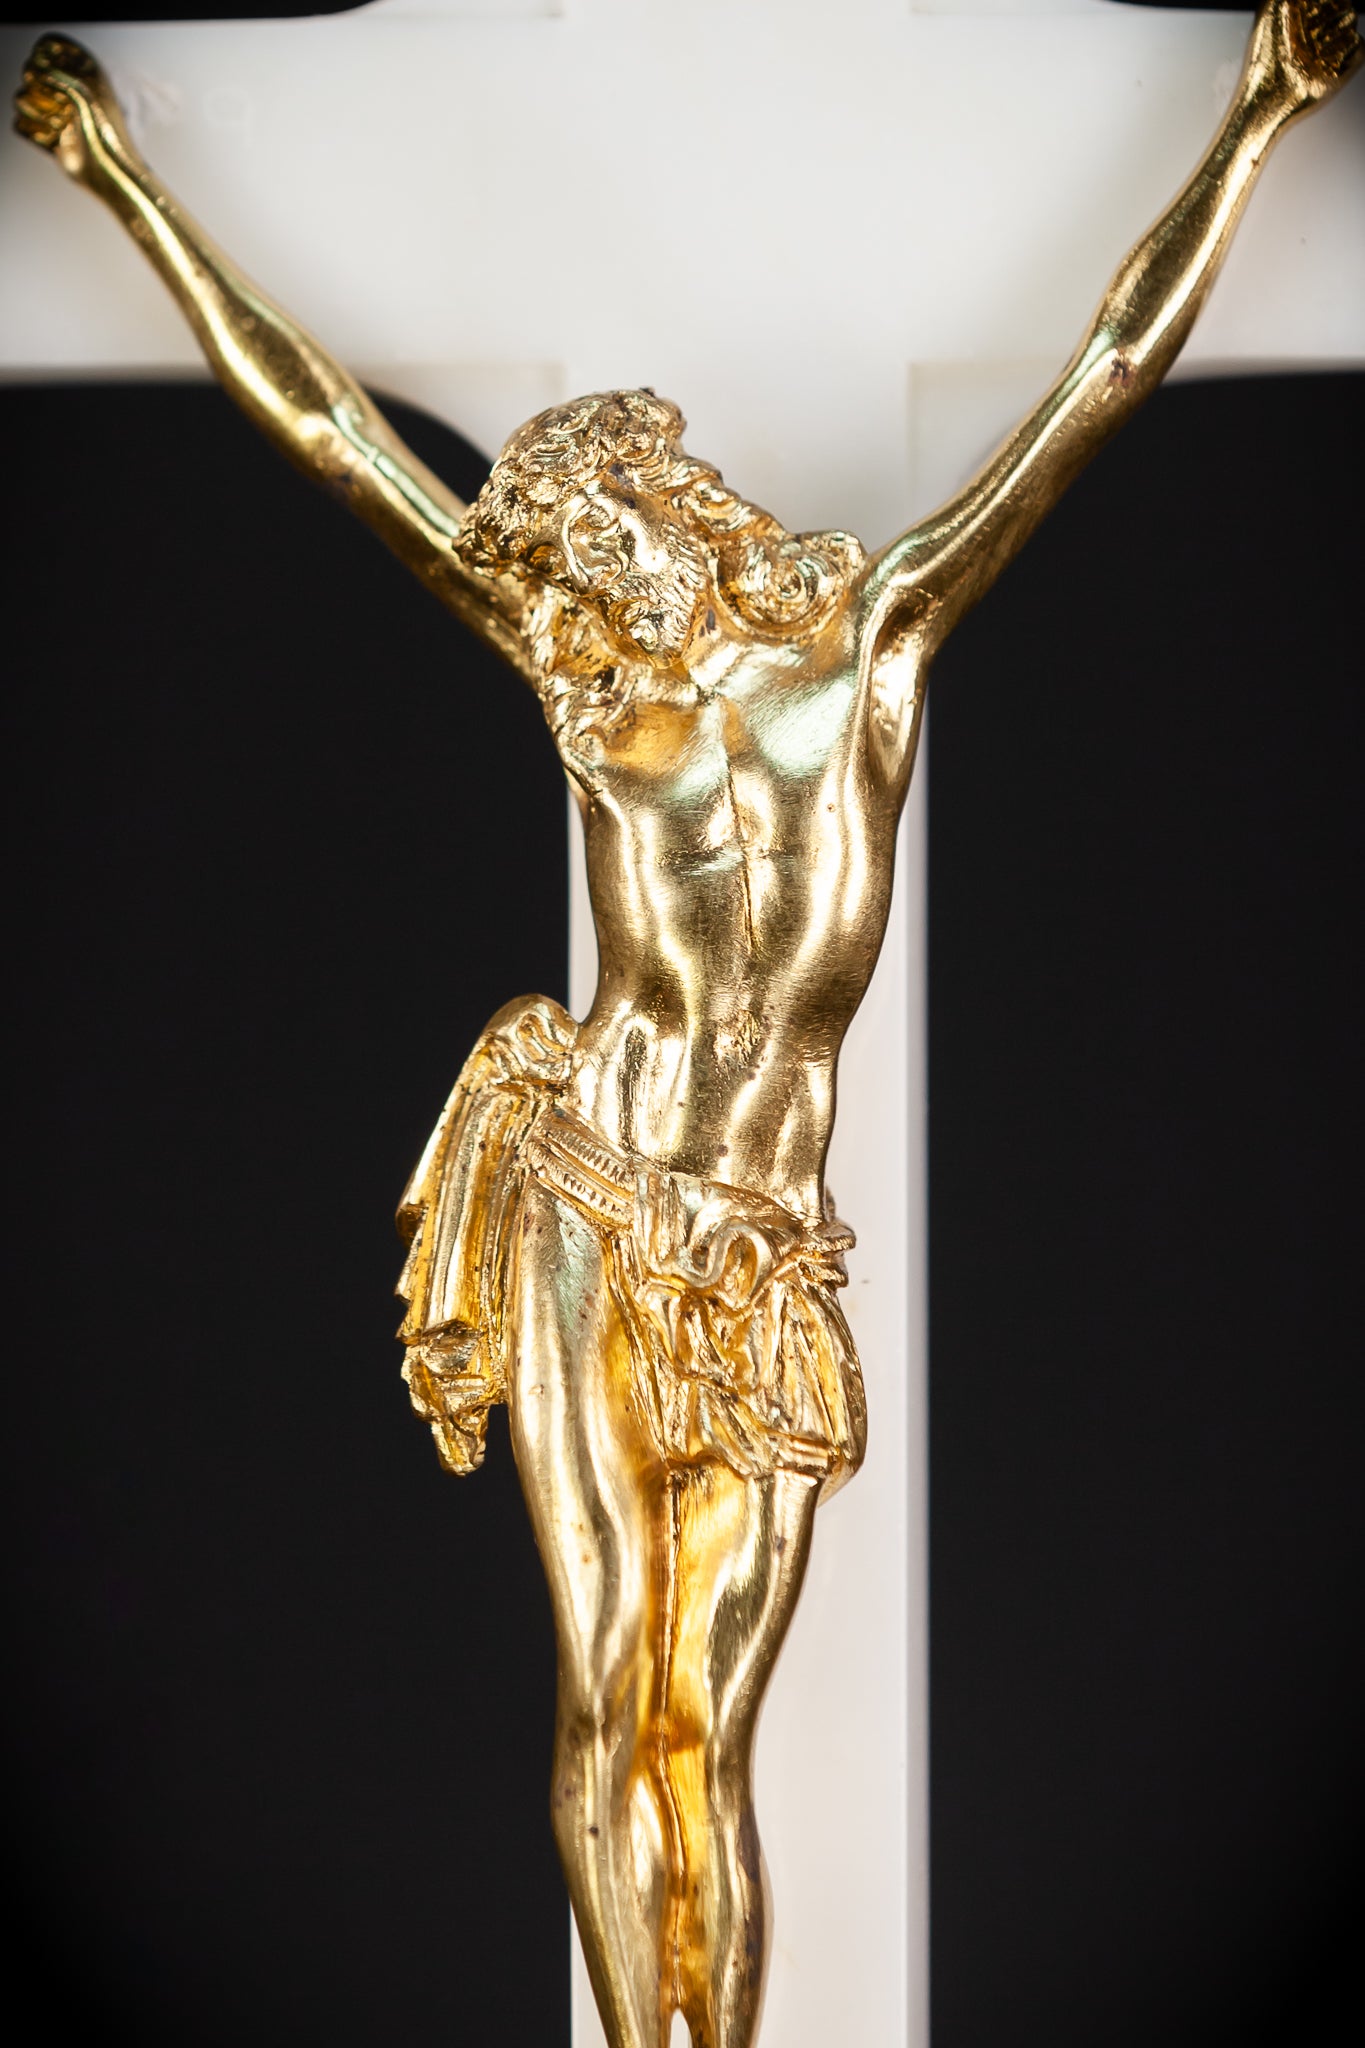 Marble and Gilded Bronze Altar Crucifix | 1800s Antique | 20.1" / 51 cm